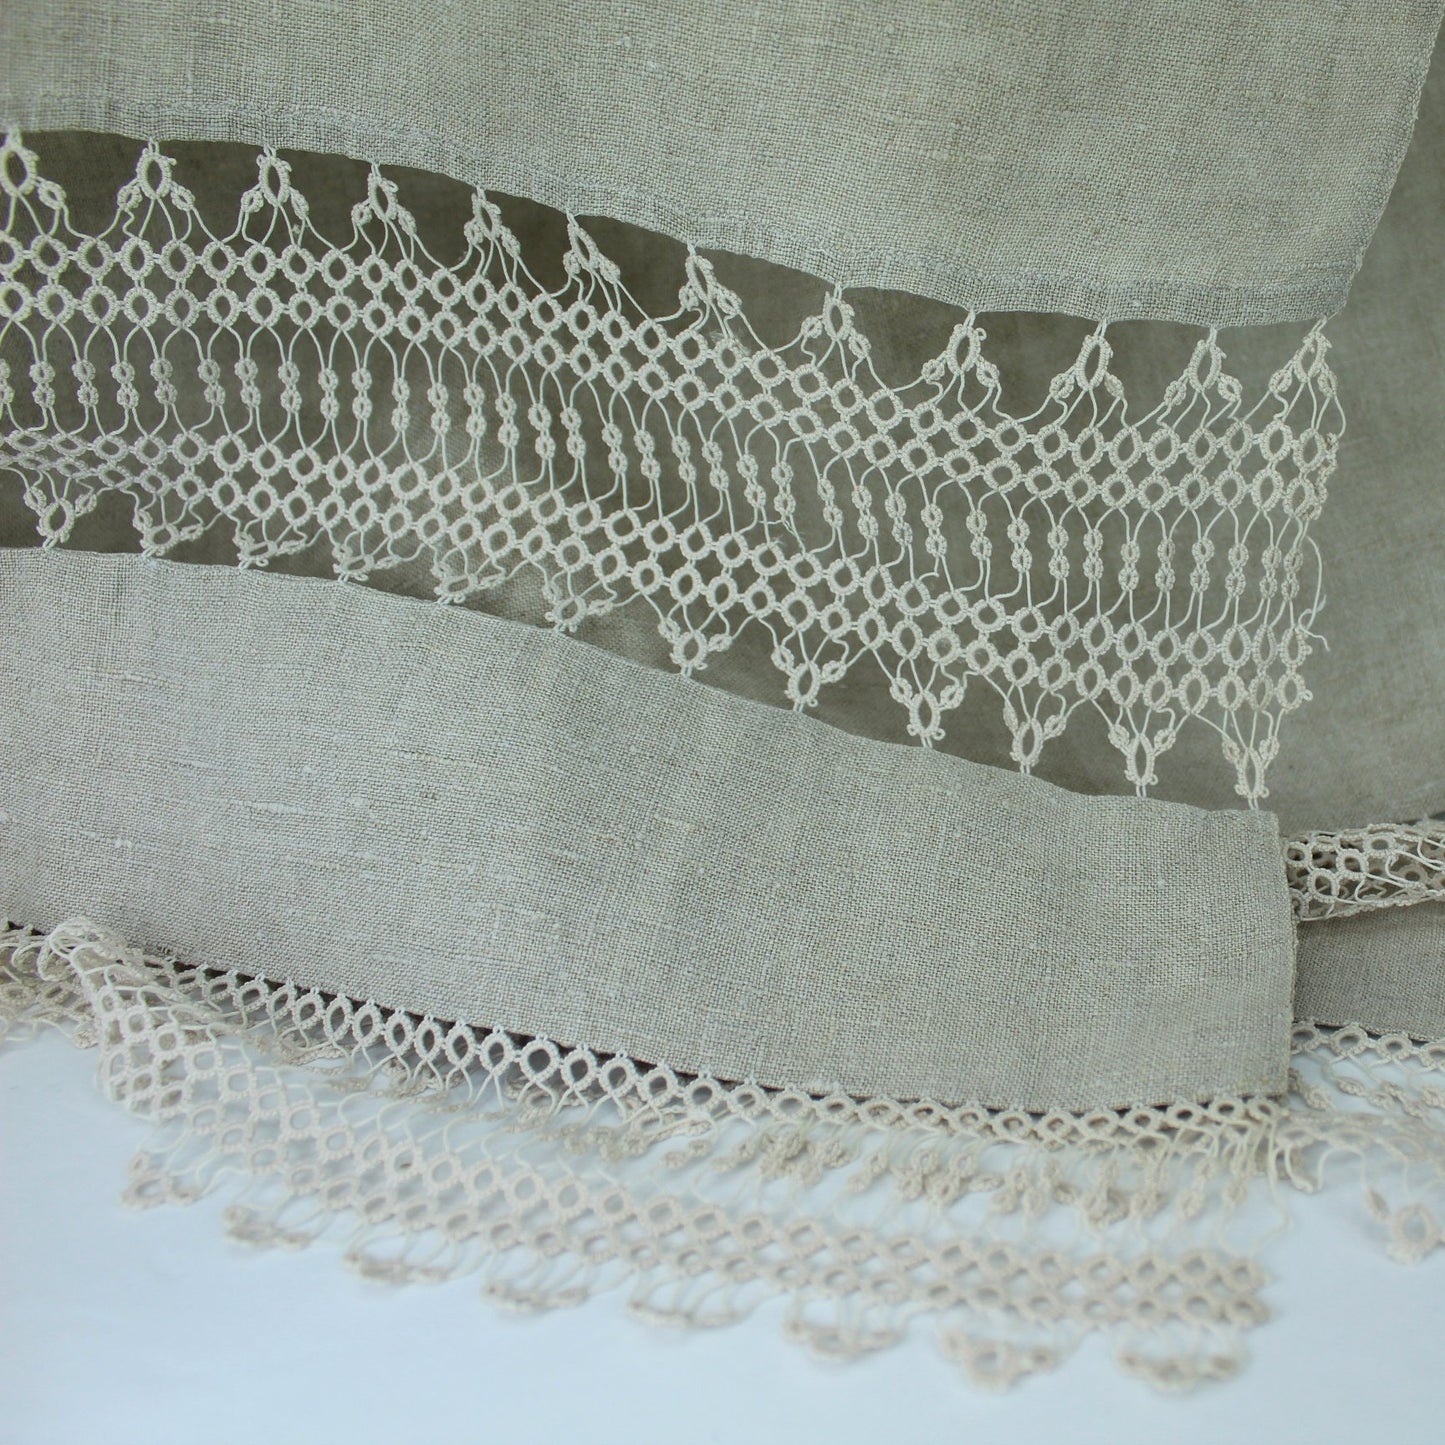 Long Antique Table Runner Natural Linen Double Tatting Inserts Great for Shawl closeup of lace